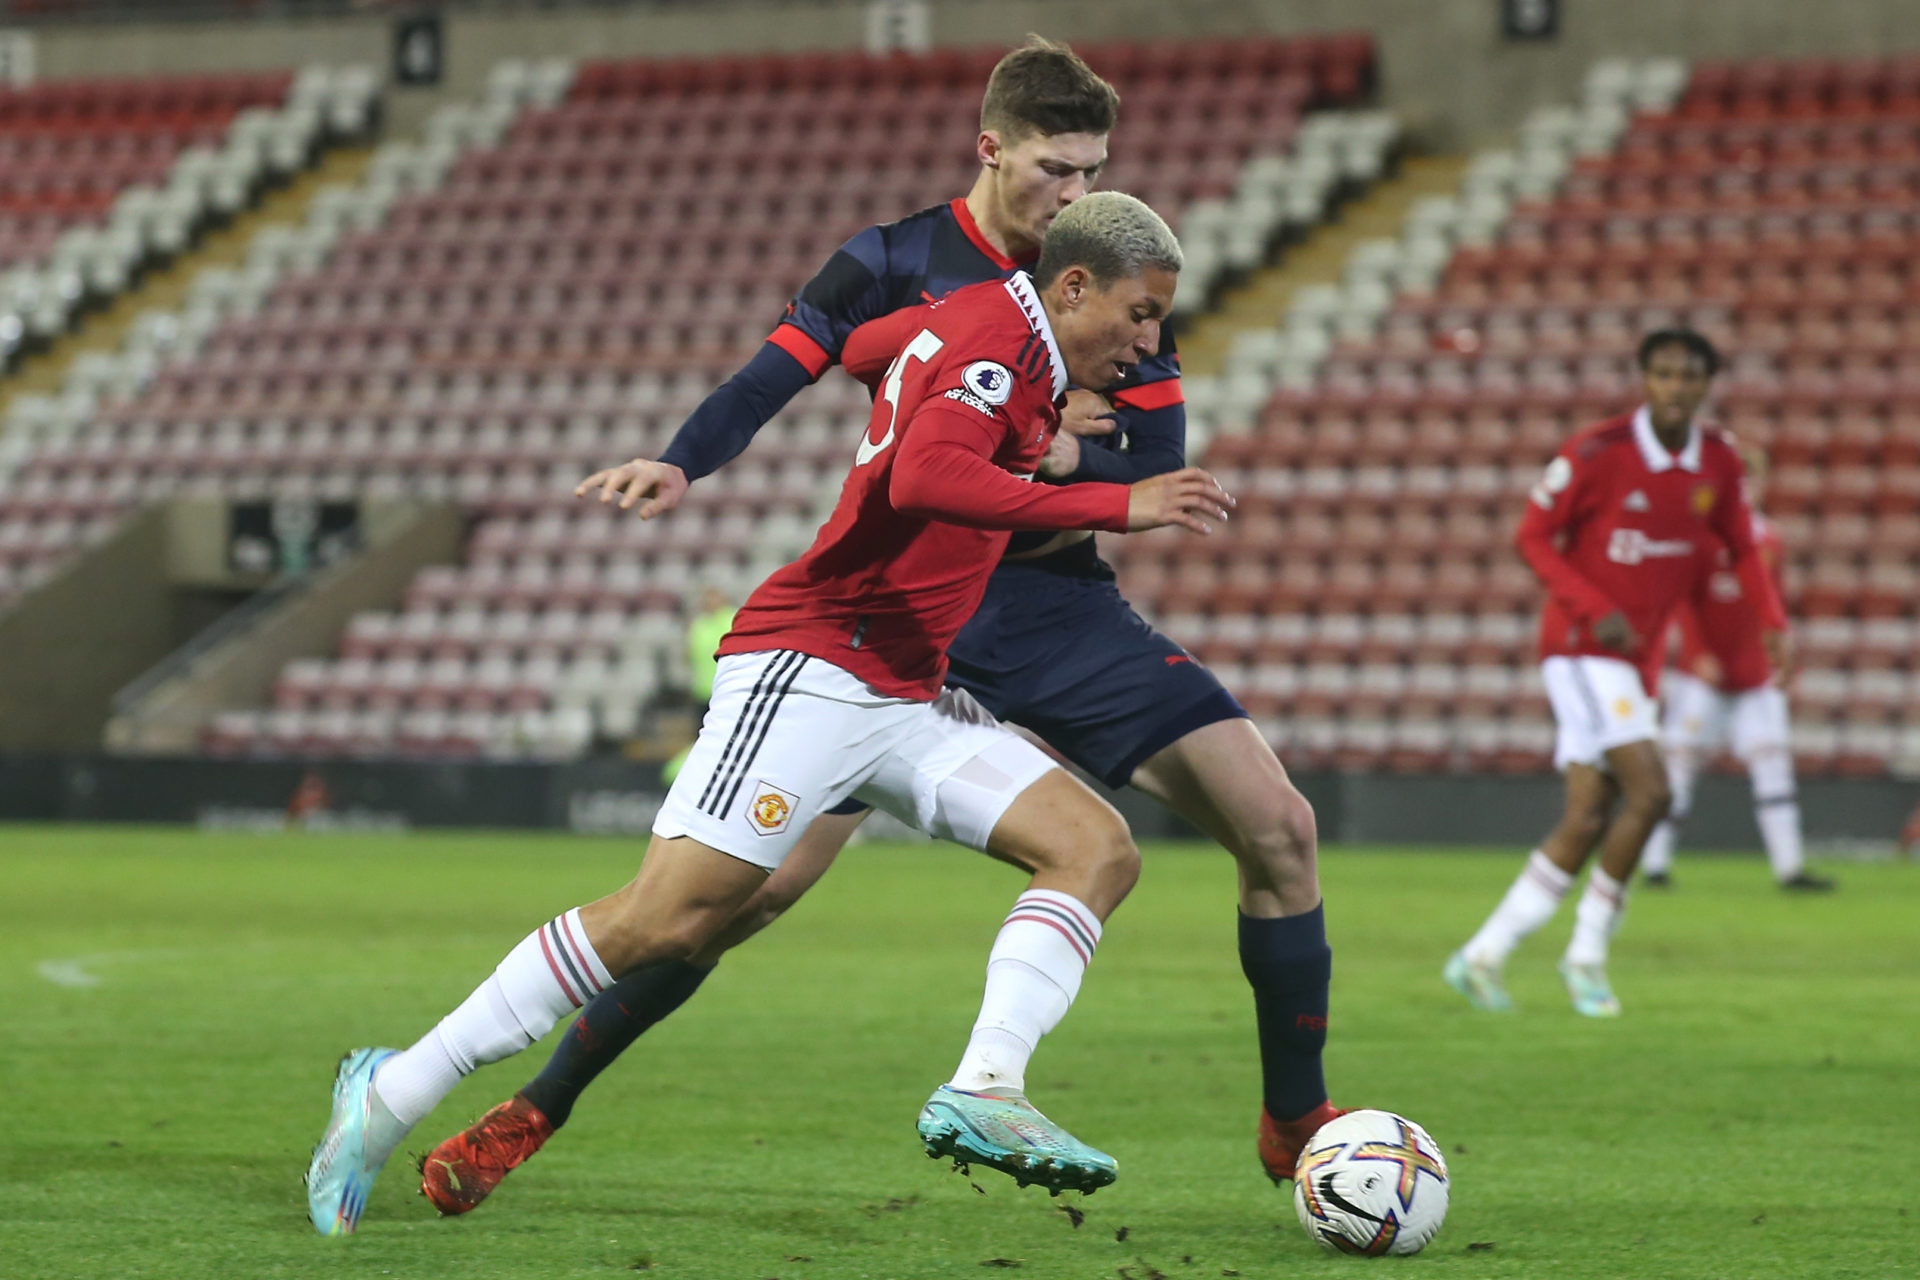 Mateo Mejia provides assist as Manchester United u21 side win